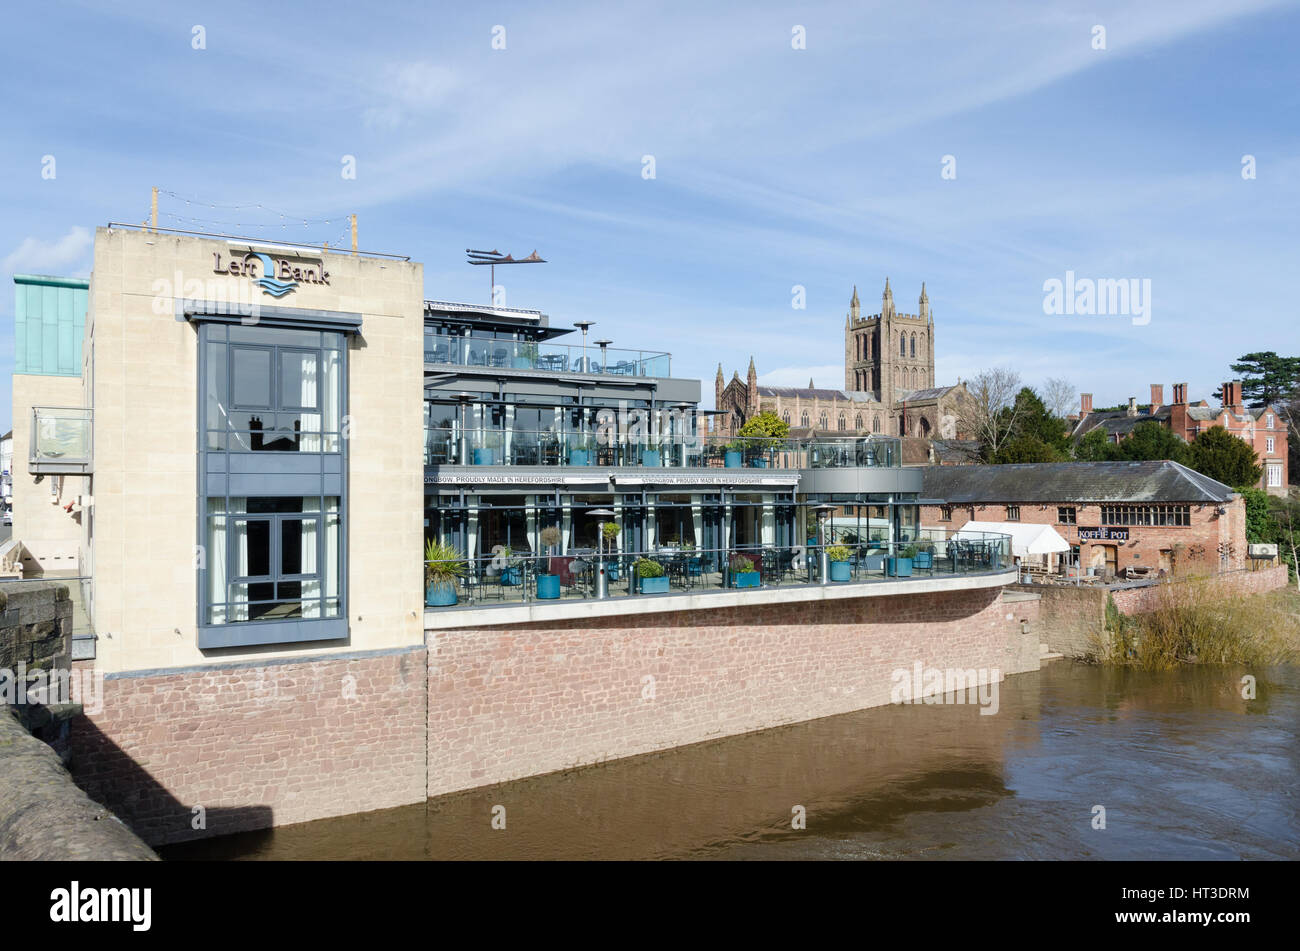 The Left Bank restaurant and banqueting centre on the River Wye in Hereford, Herefordshire Stock Photo